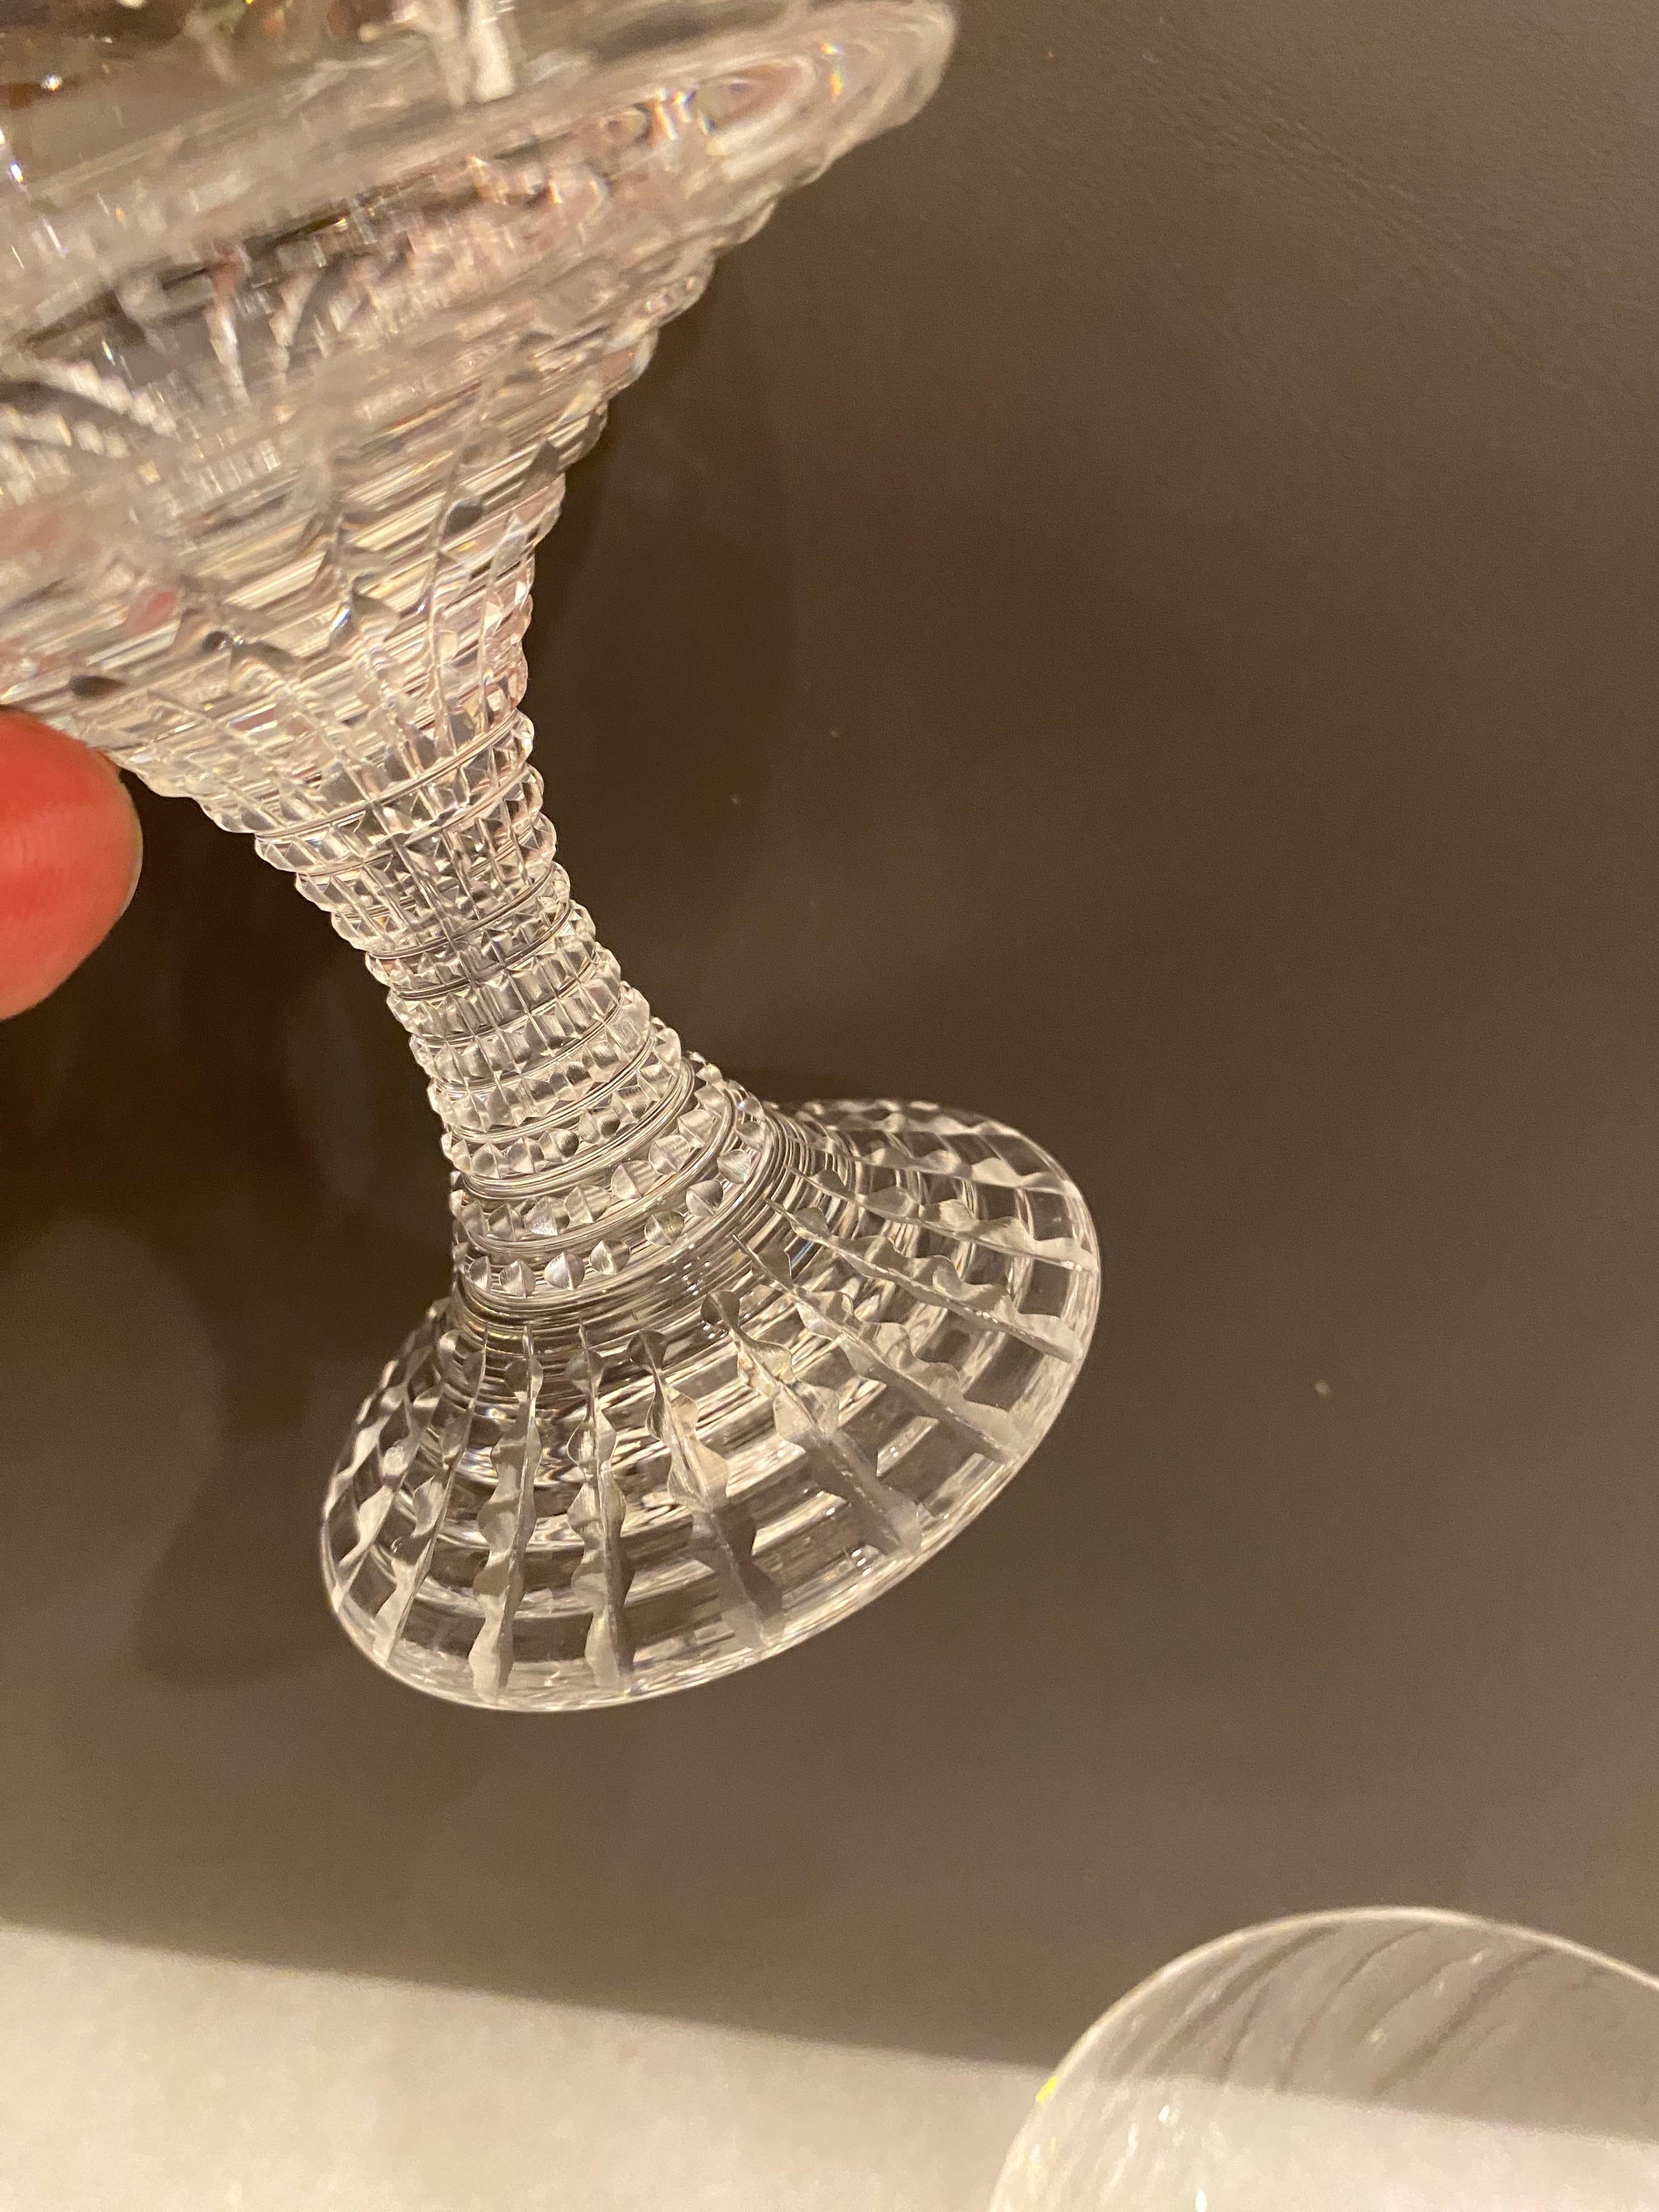 Rosenthal Polaris Crystal Set of 36 pieces, 12 of each style in perfect condition!  the etched design has the look of a spider web.  Nice weight and feel!
Set consists of three sizes

3.5 across and 5